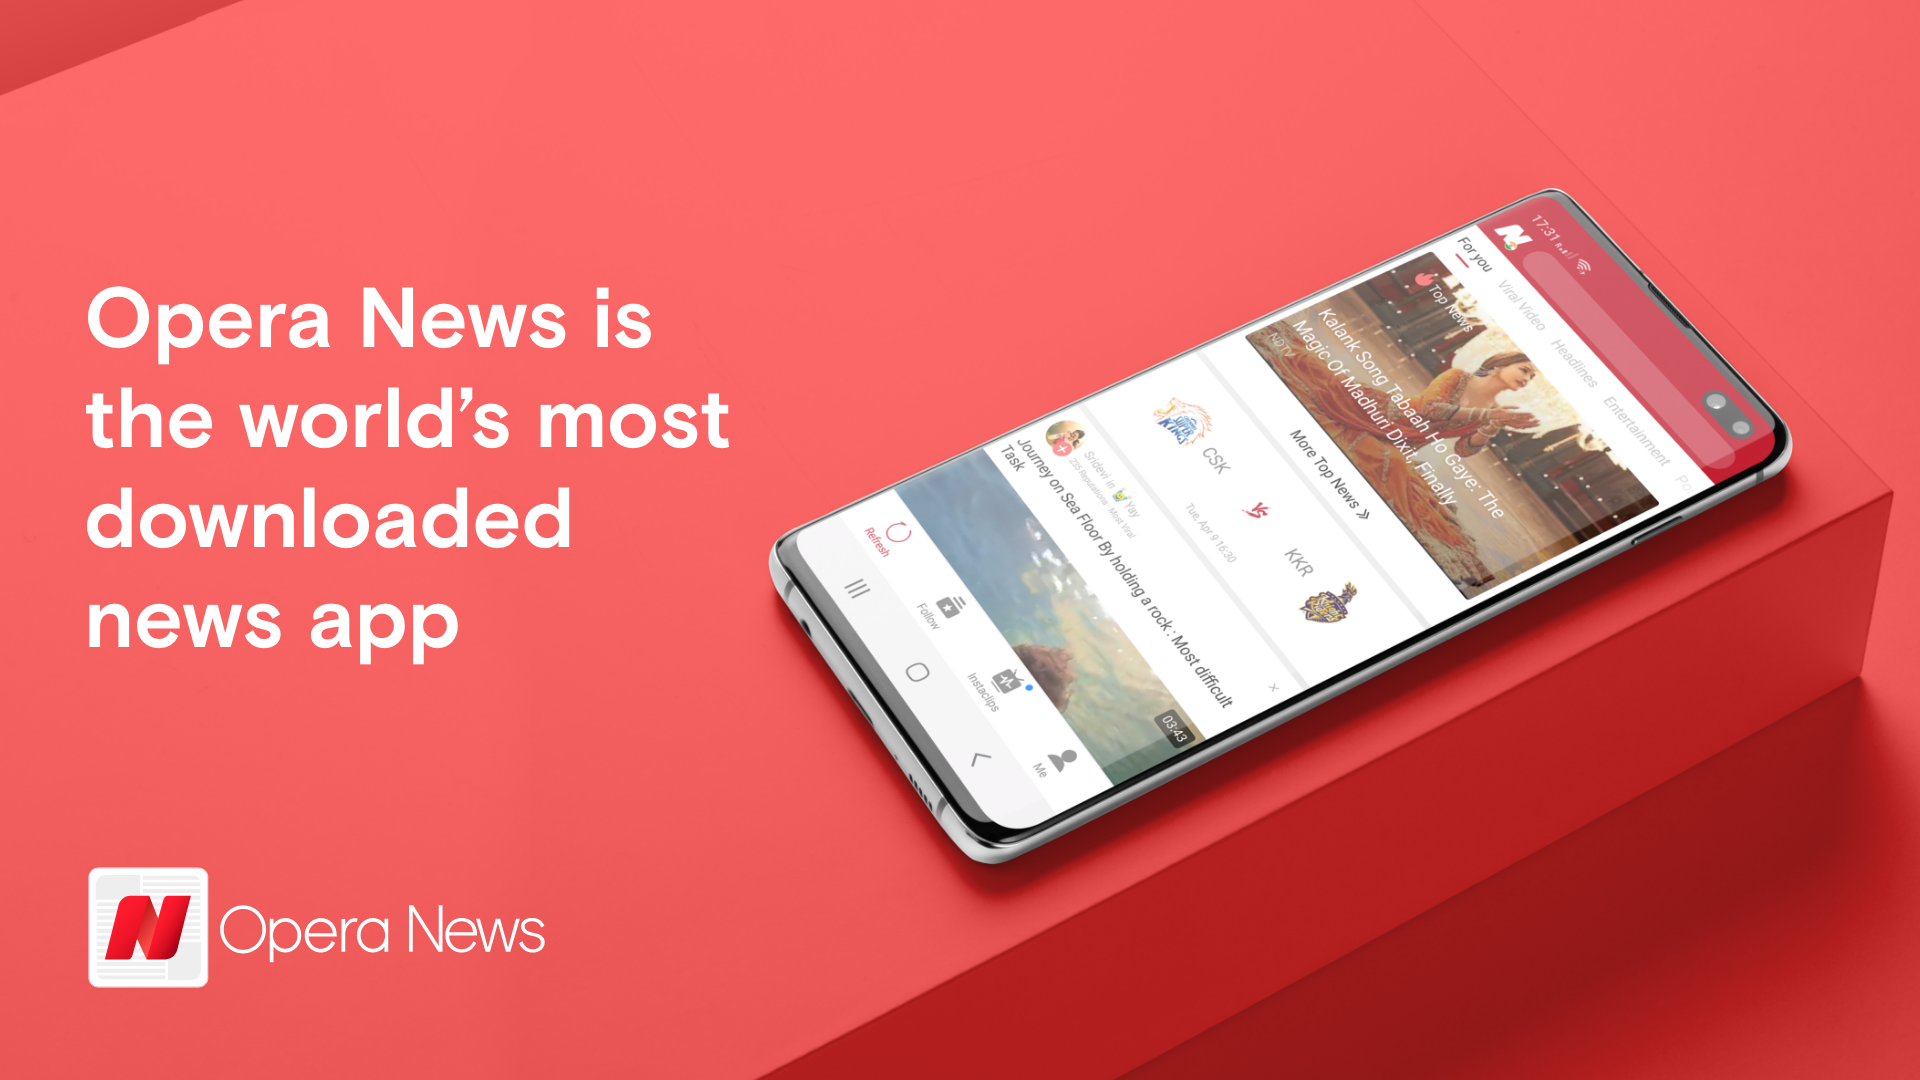 Opera News is now the most downloaded news app in the world